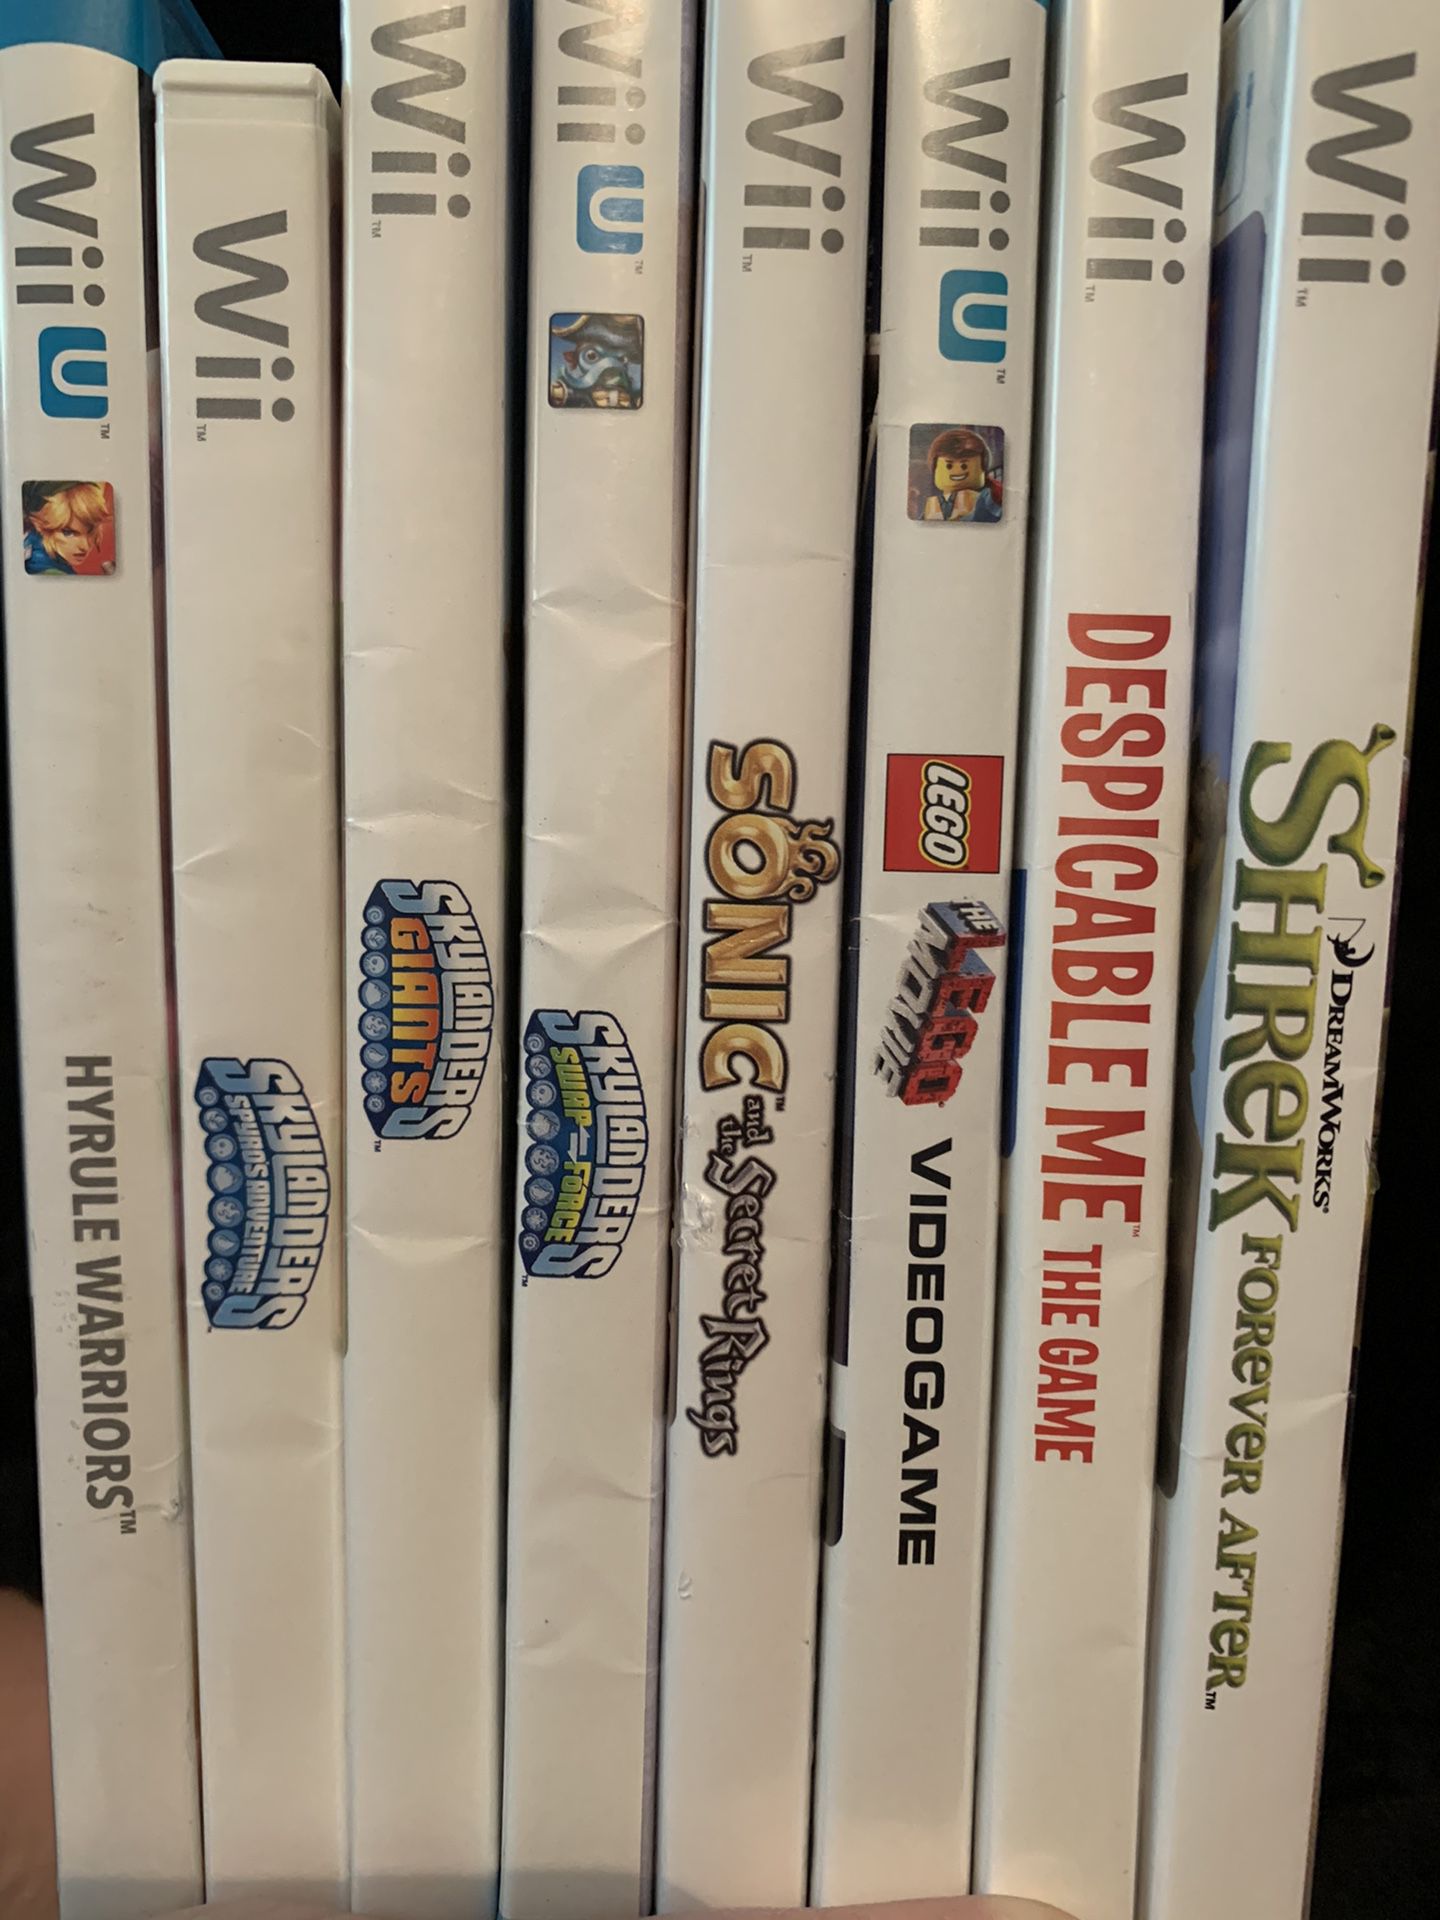 Wii and Wii U games (8)